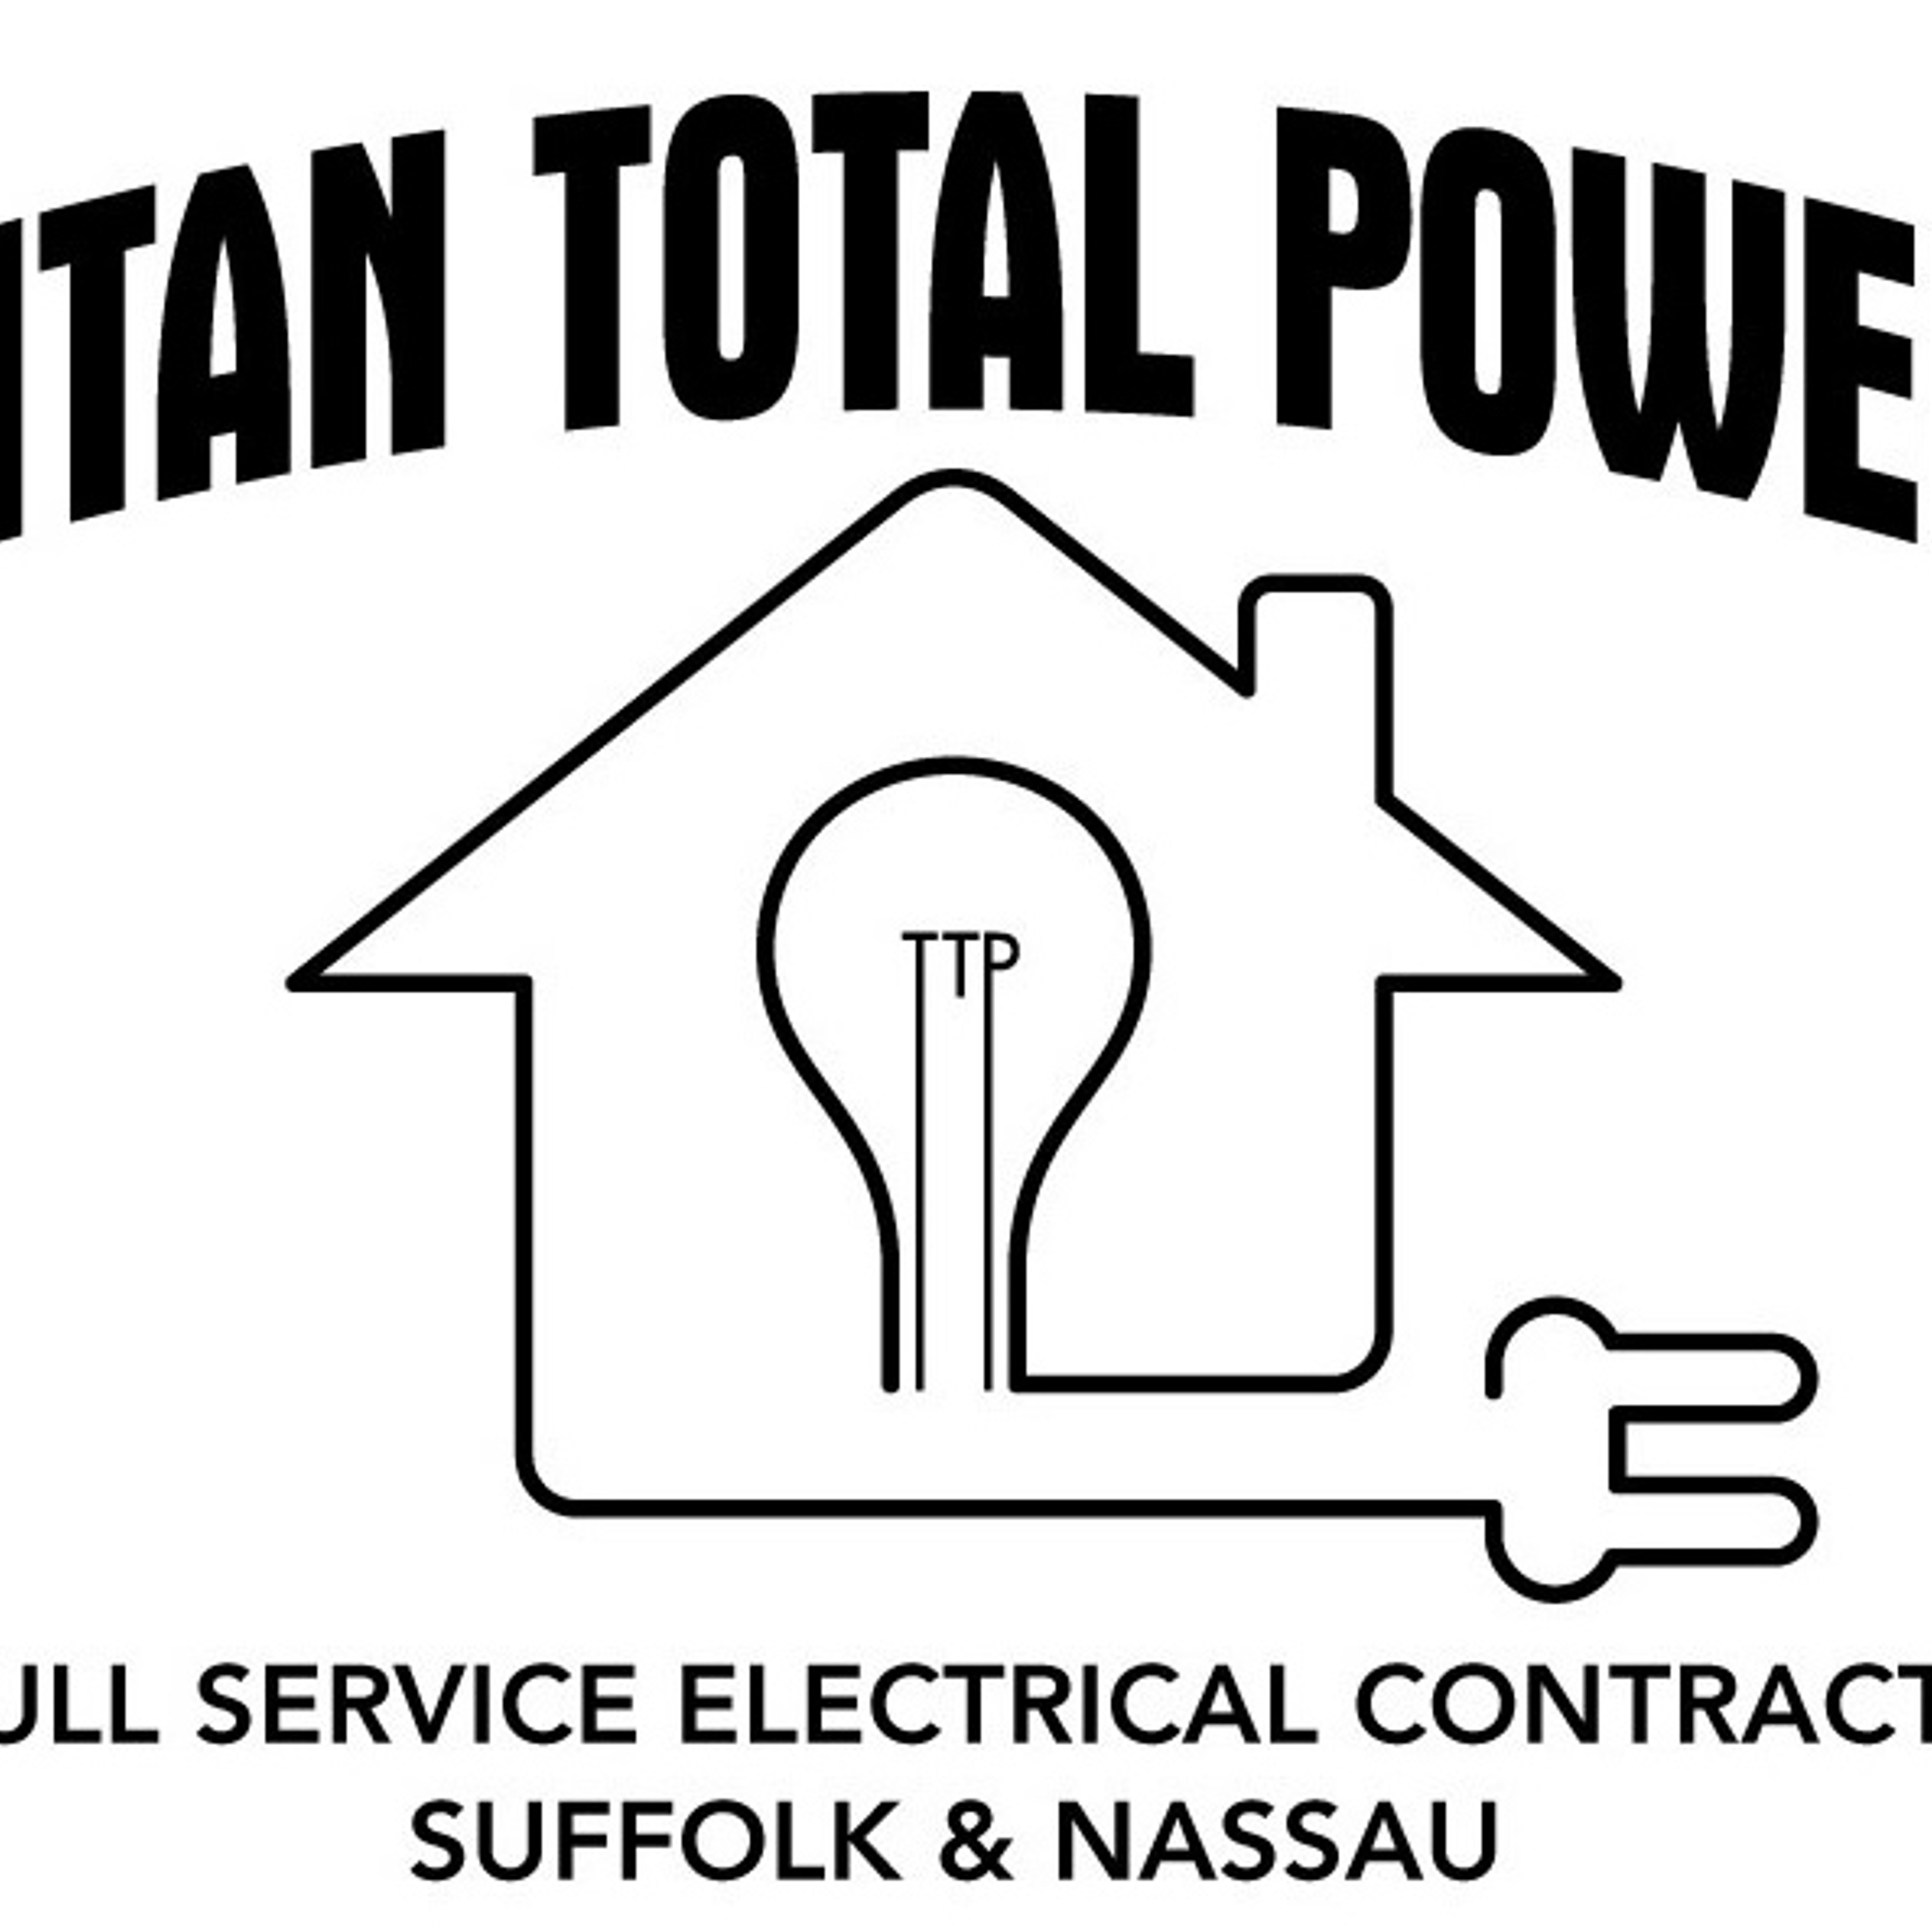 A Full Service Electrical Contractor For Suffolk & Nassau Counties